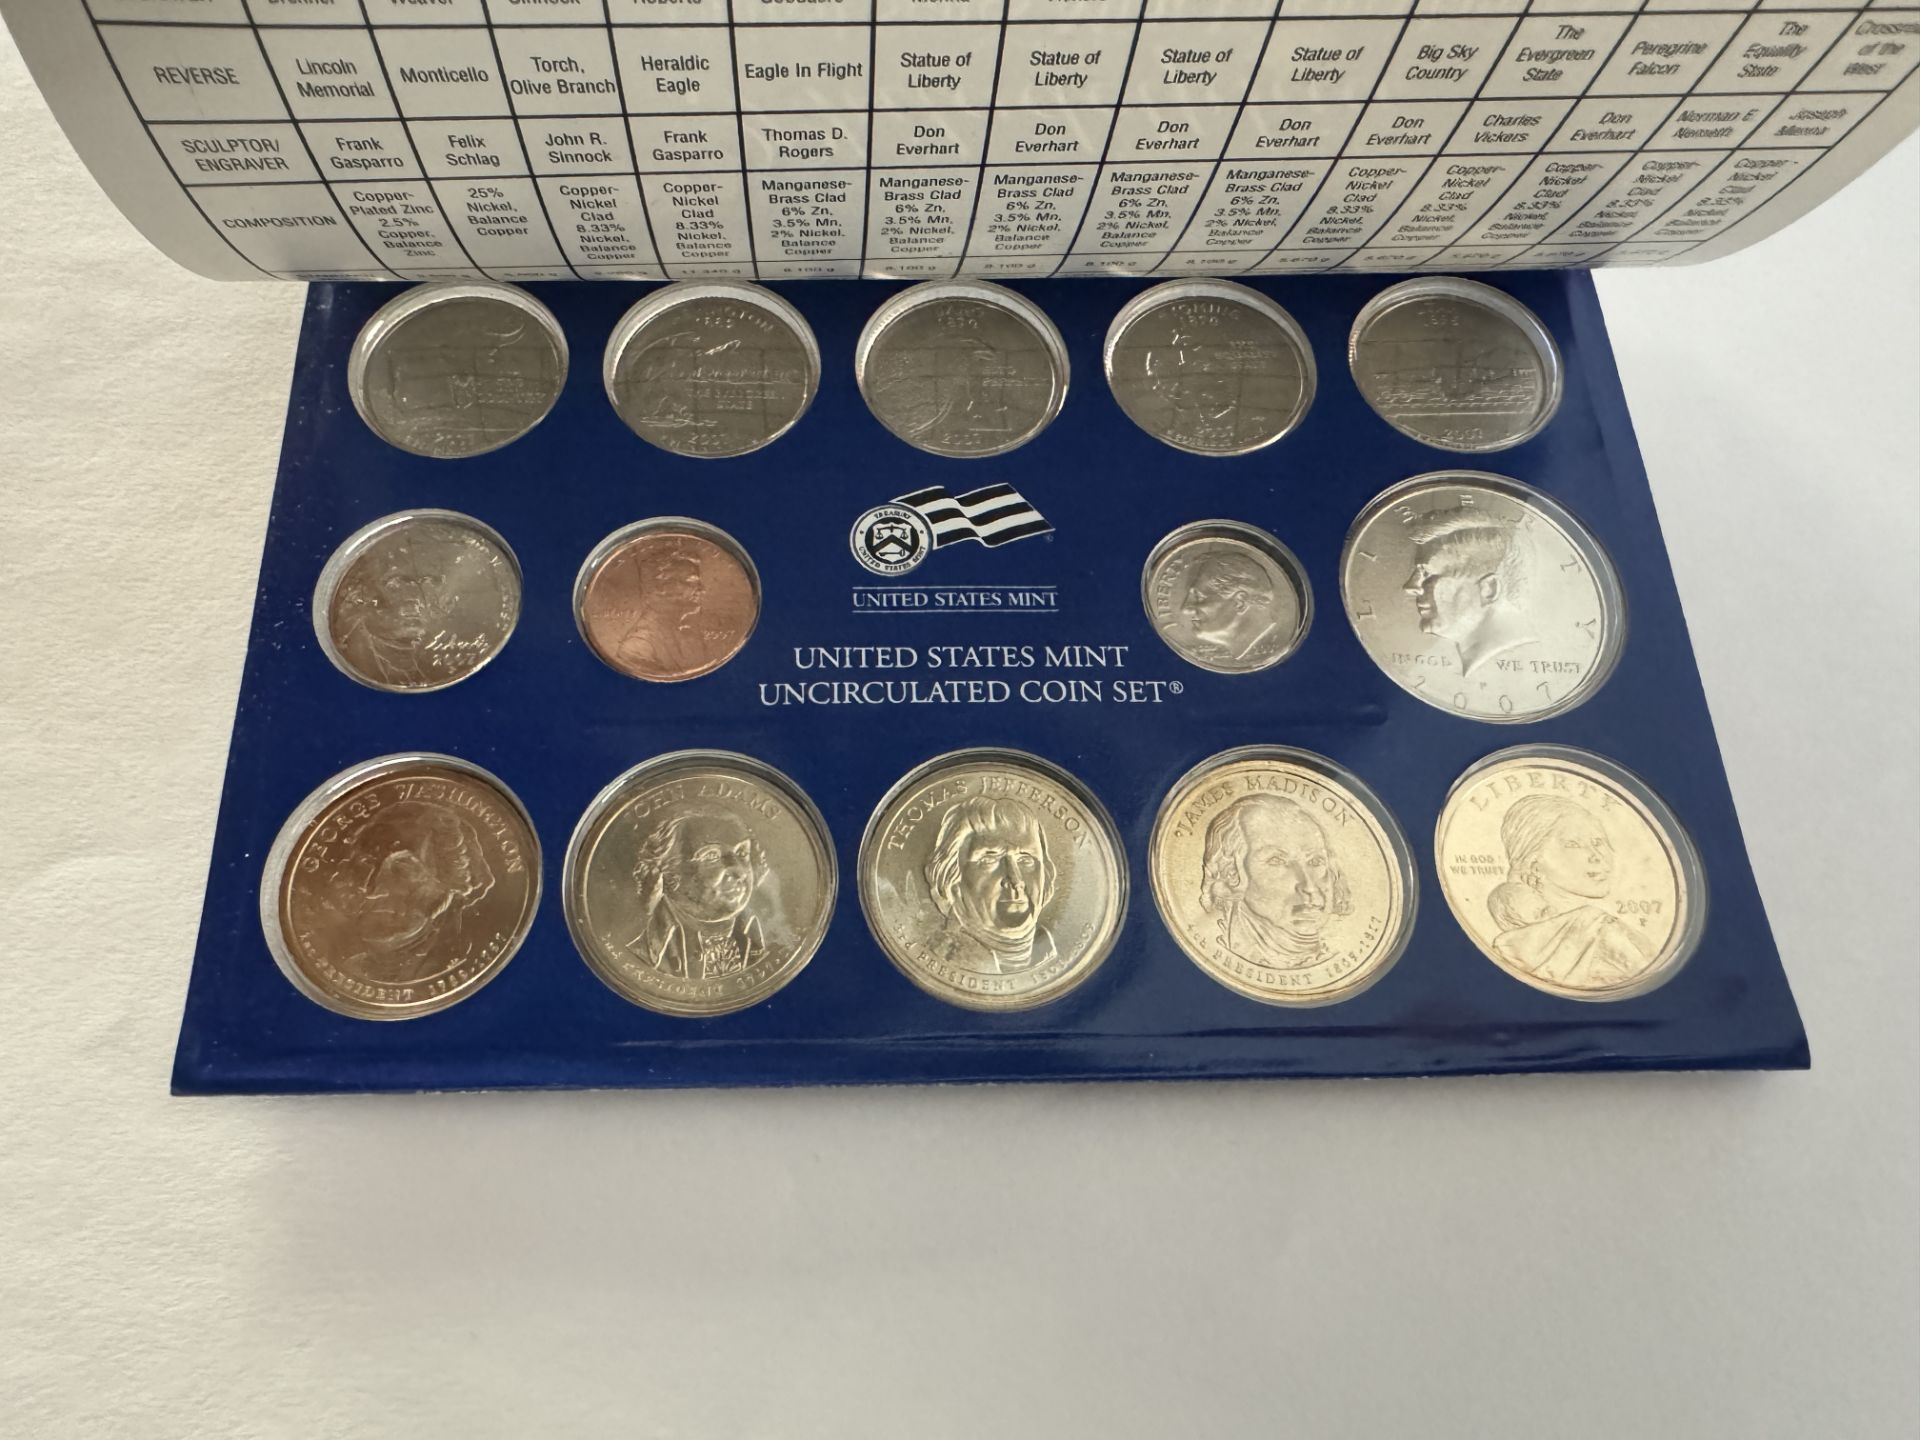 2007 Philadelphia United States Mint Uncirculated Coin Set® - Image 2 of 2